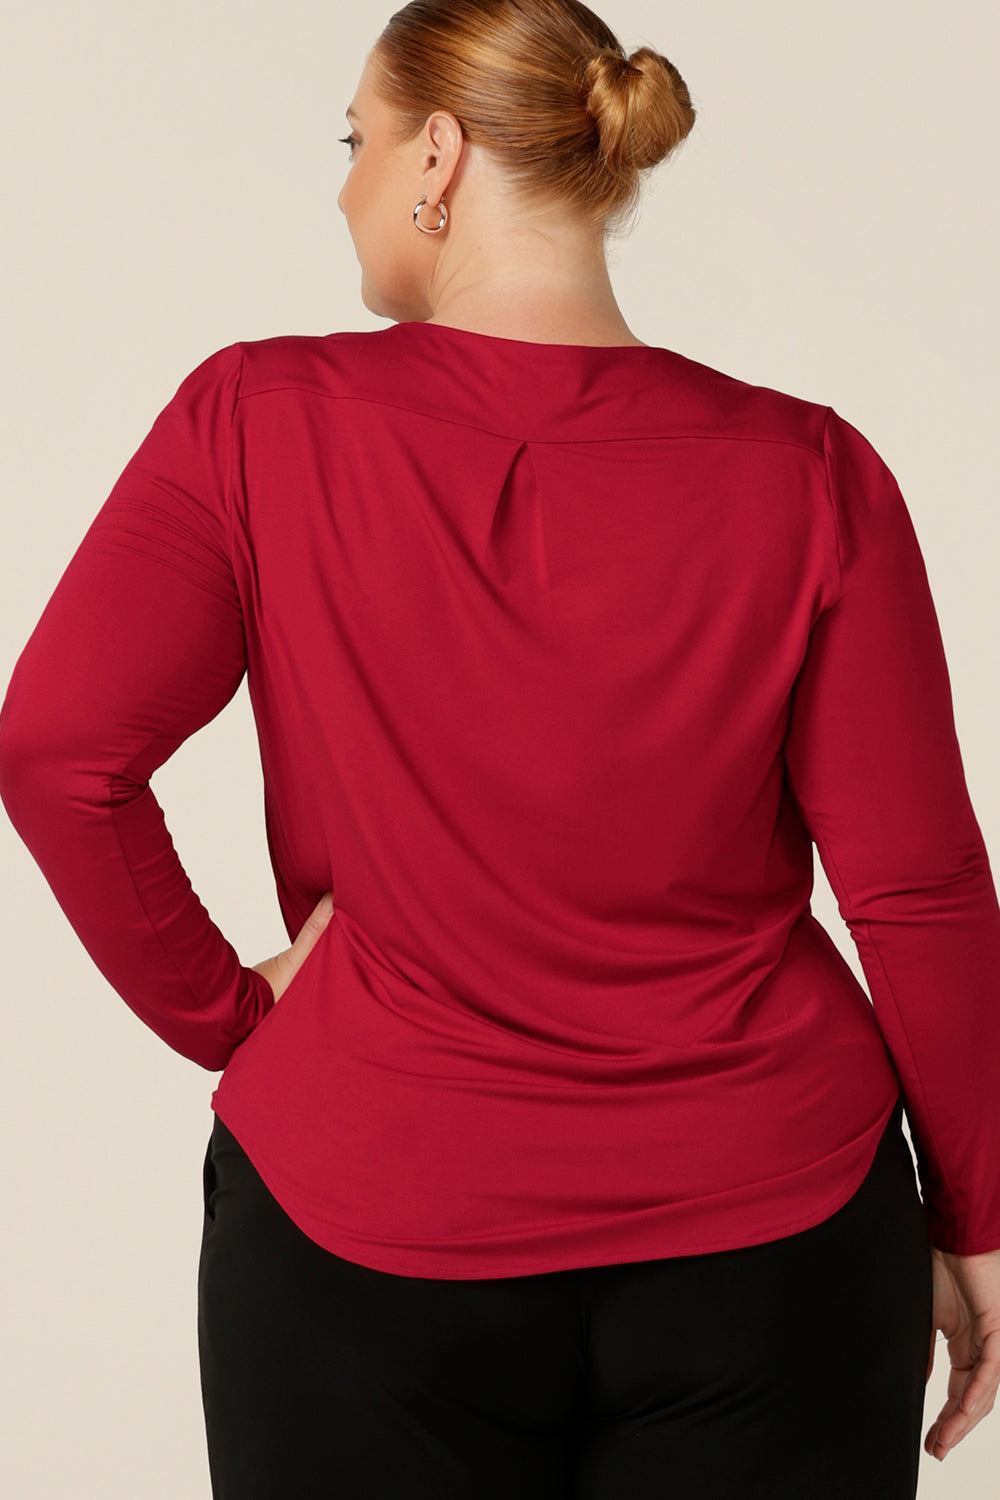 Back view of a fuller figure, size 18 woman wearing a red bamboo jersey top with long sleeves and a round neckline. Made in Australia, this top works for smart-casual workwear and off-duty style.